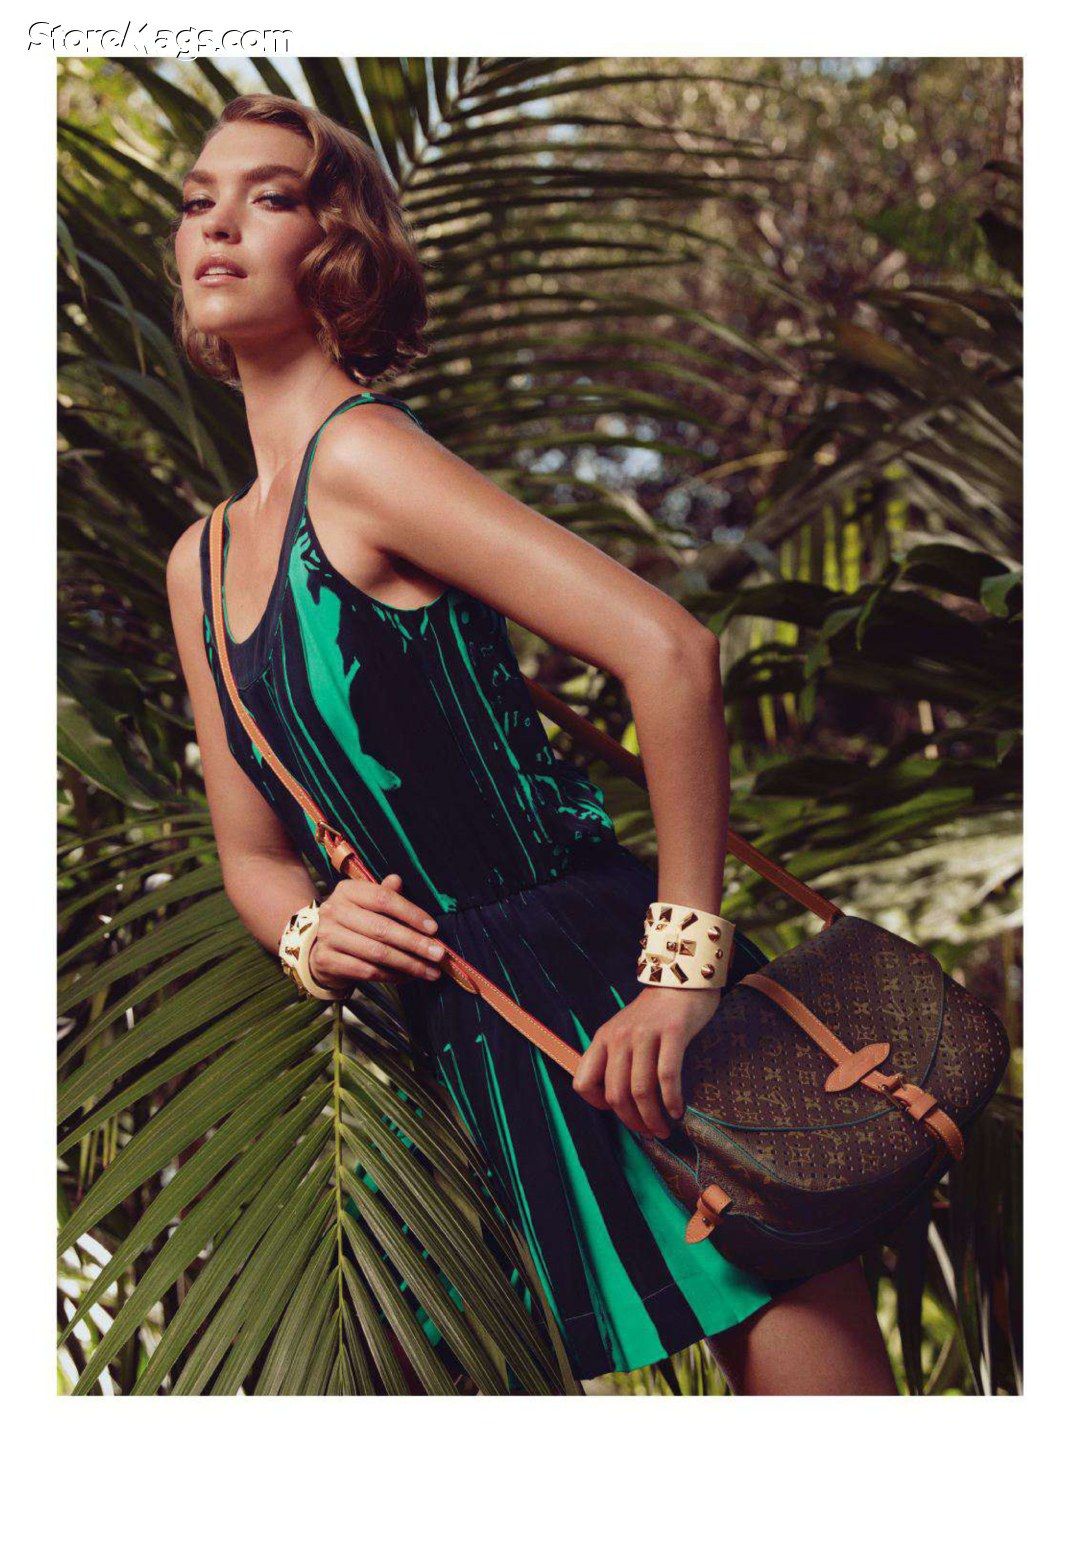 Louis Vuitton Resort 2012 Ad Campaign | Art8amby&#39;s Blog